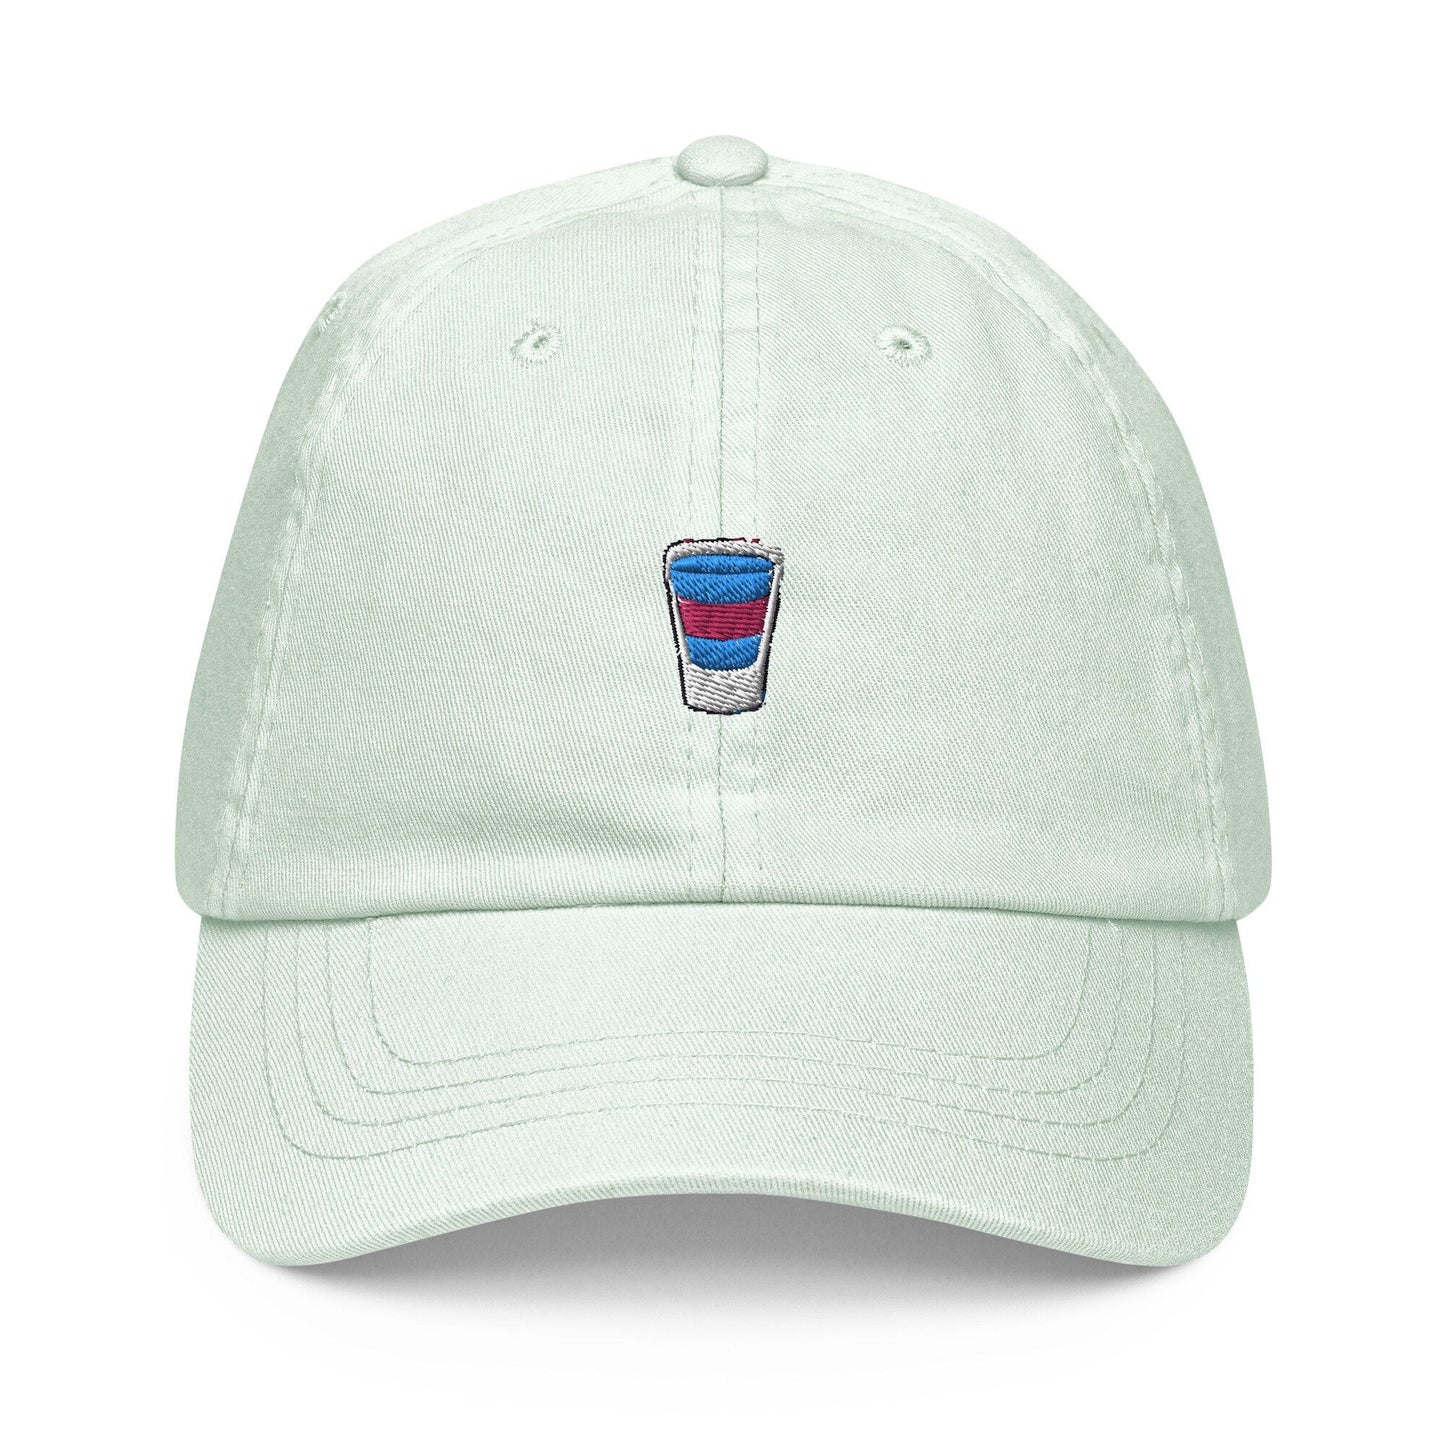 Pornstar Shot Dad Hat - Gift for Mexican Spirit Lovers and Party Goers - Pastel Cotton Embroidered Cap - Evilwater Originals